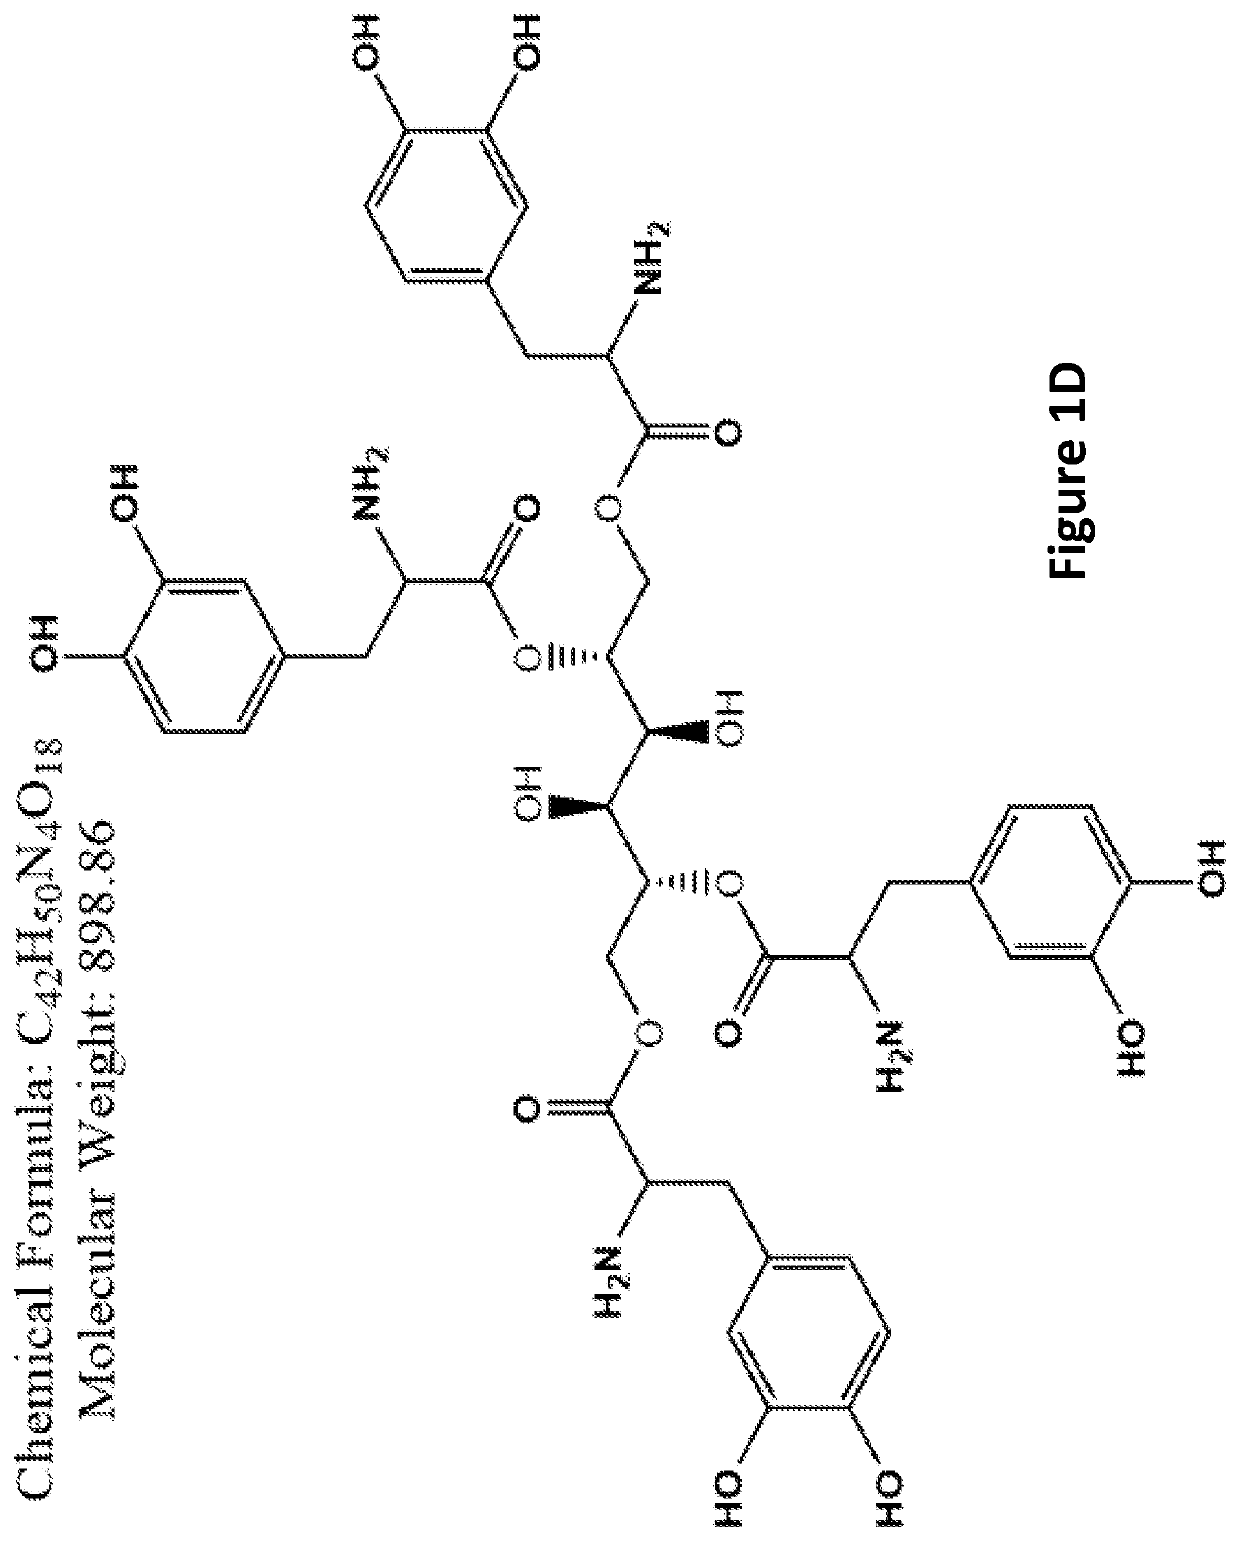 L-dopa and/or dopa decarboxylse inhibitors conjugated to sugar for the treatment of dopamine-responsive disorders